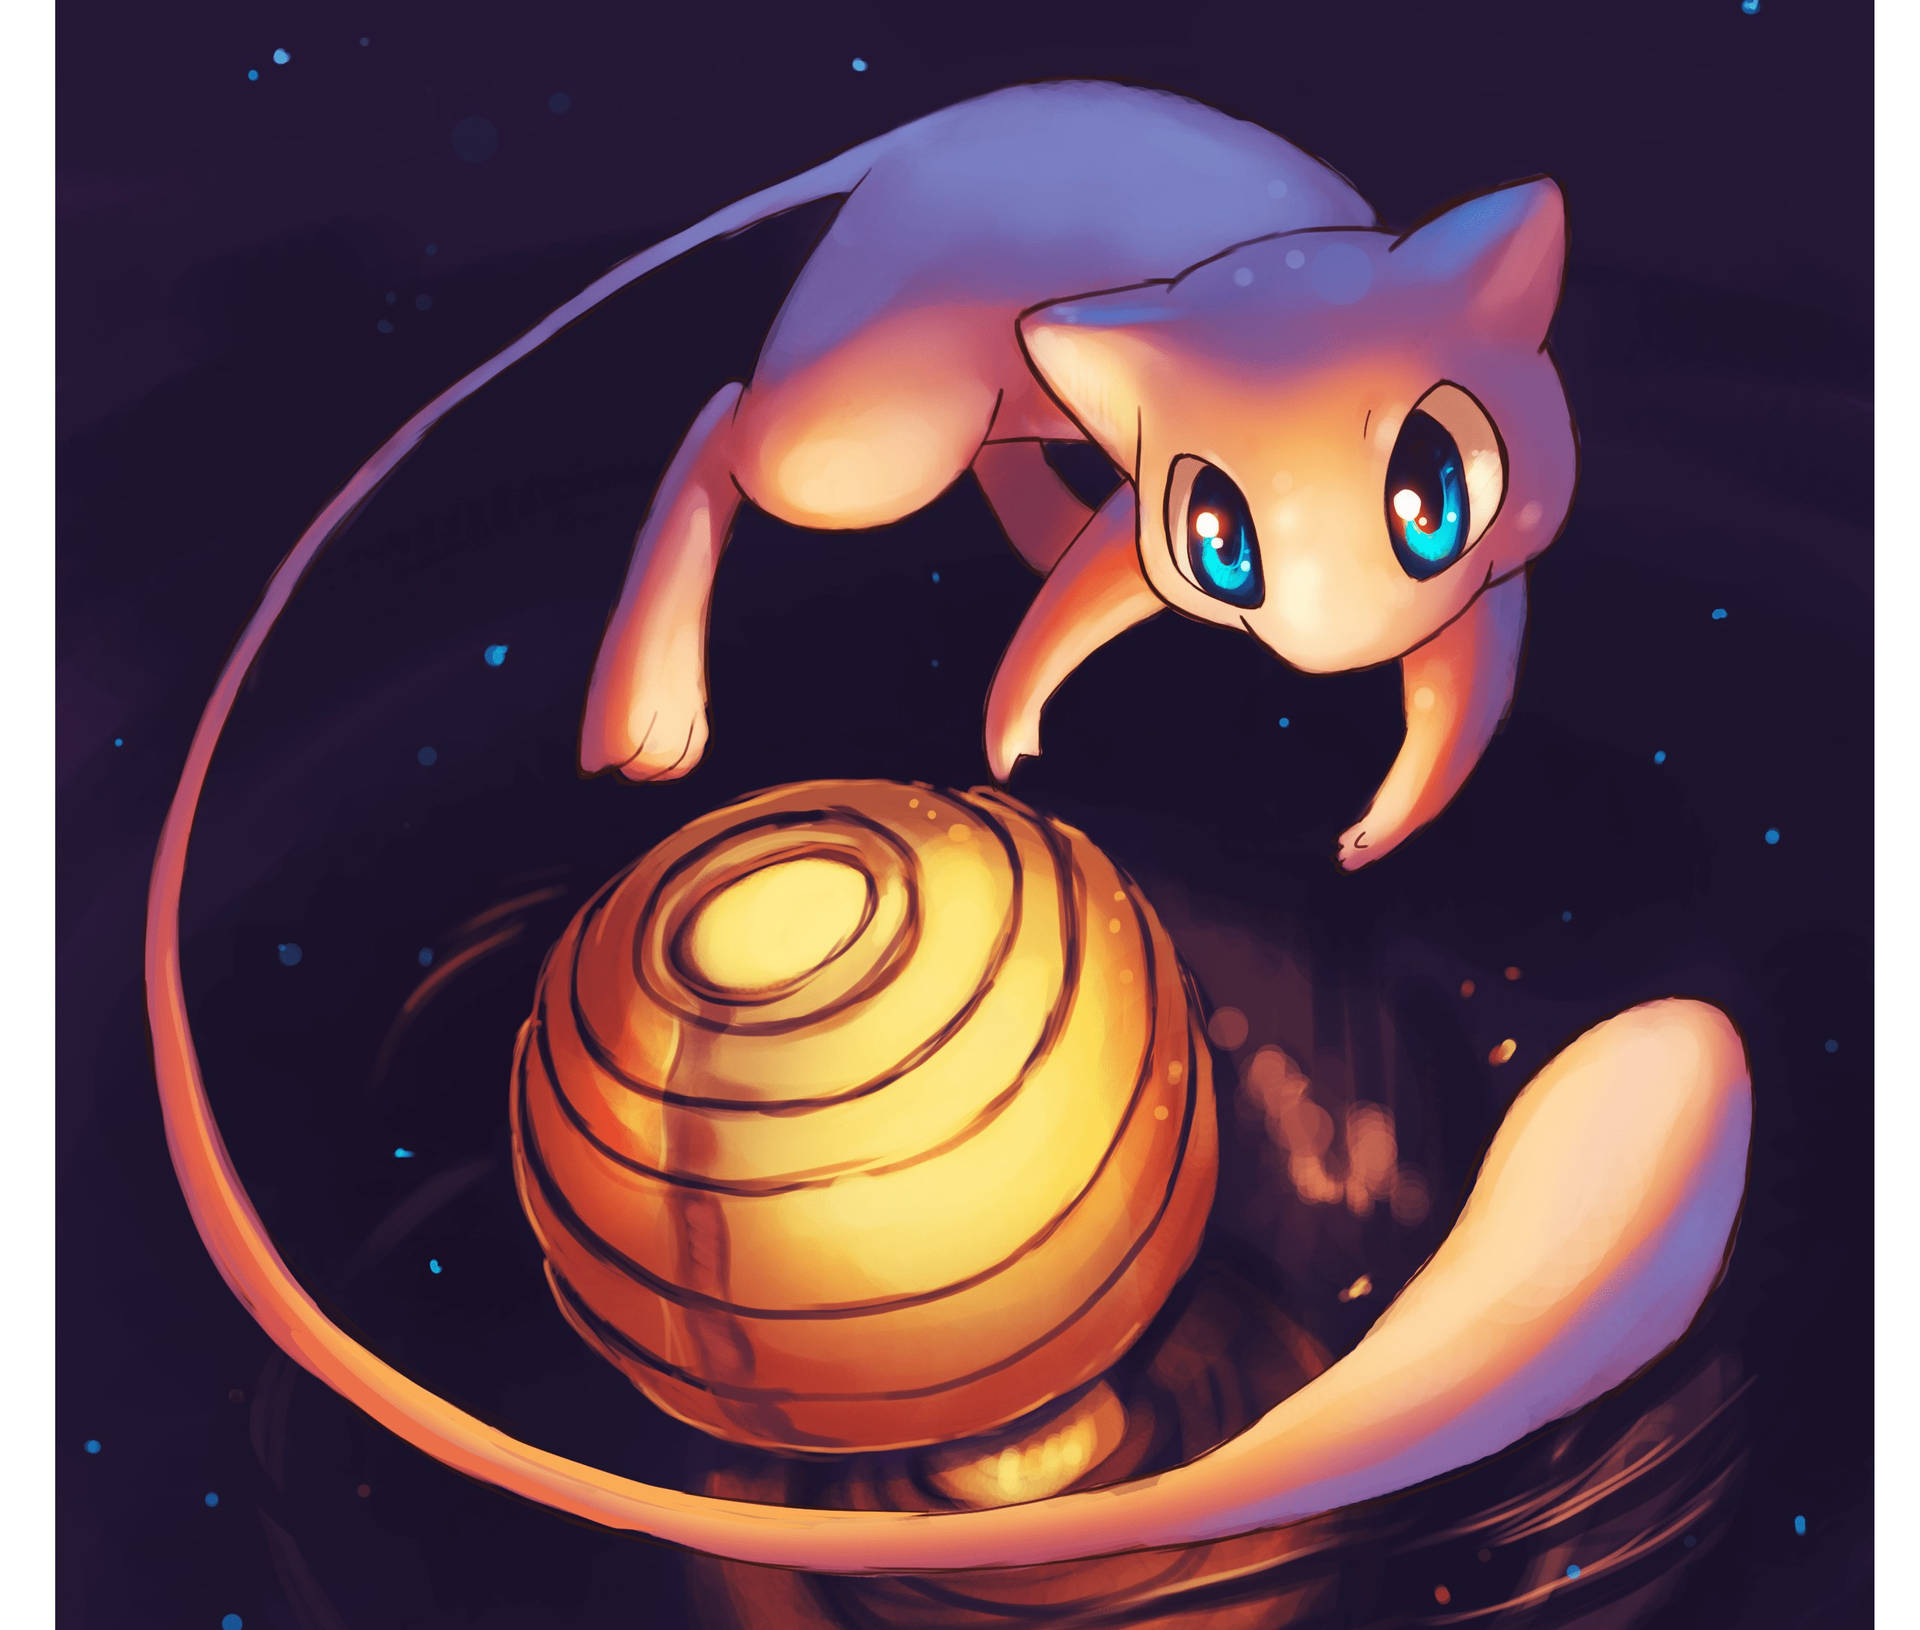 Mew 2573X2185 Wallpaper and Background Image